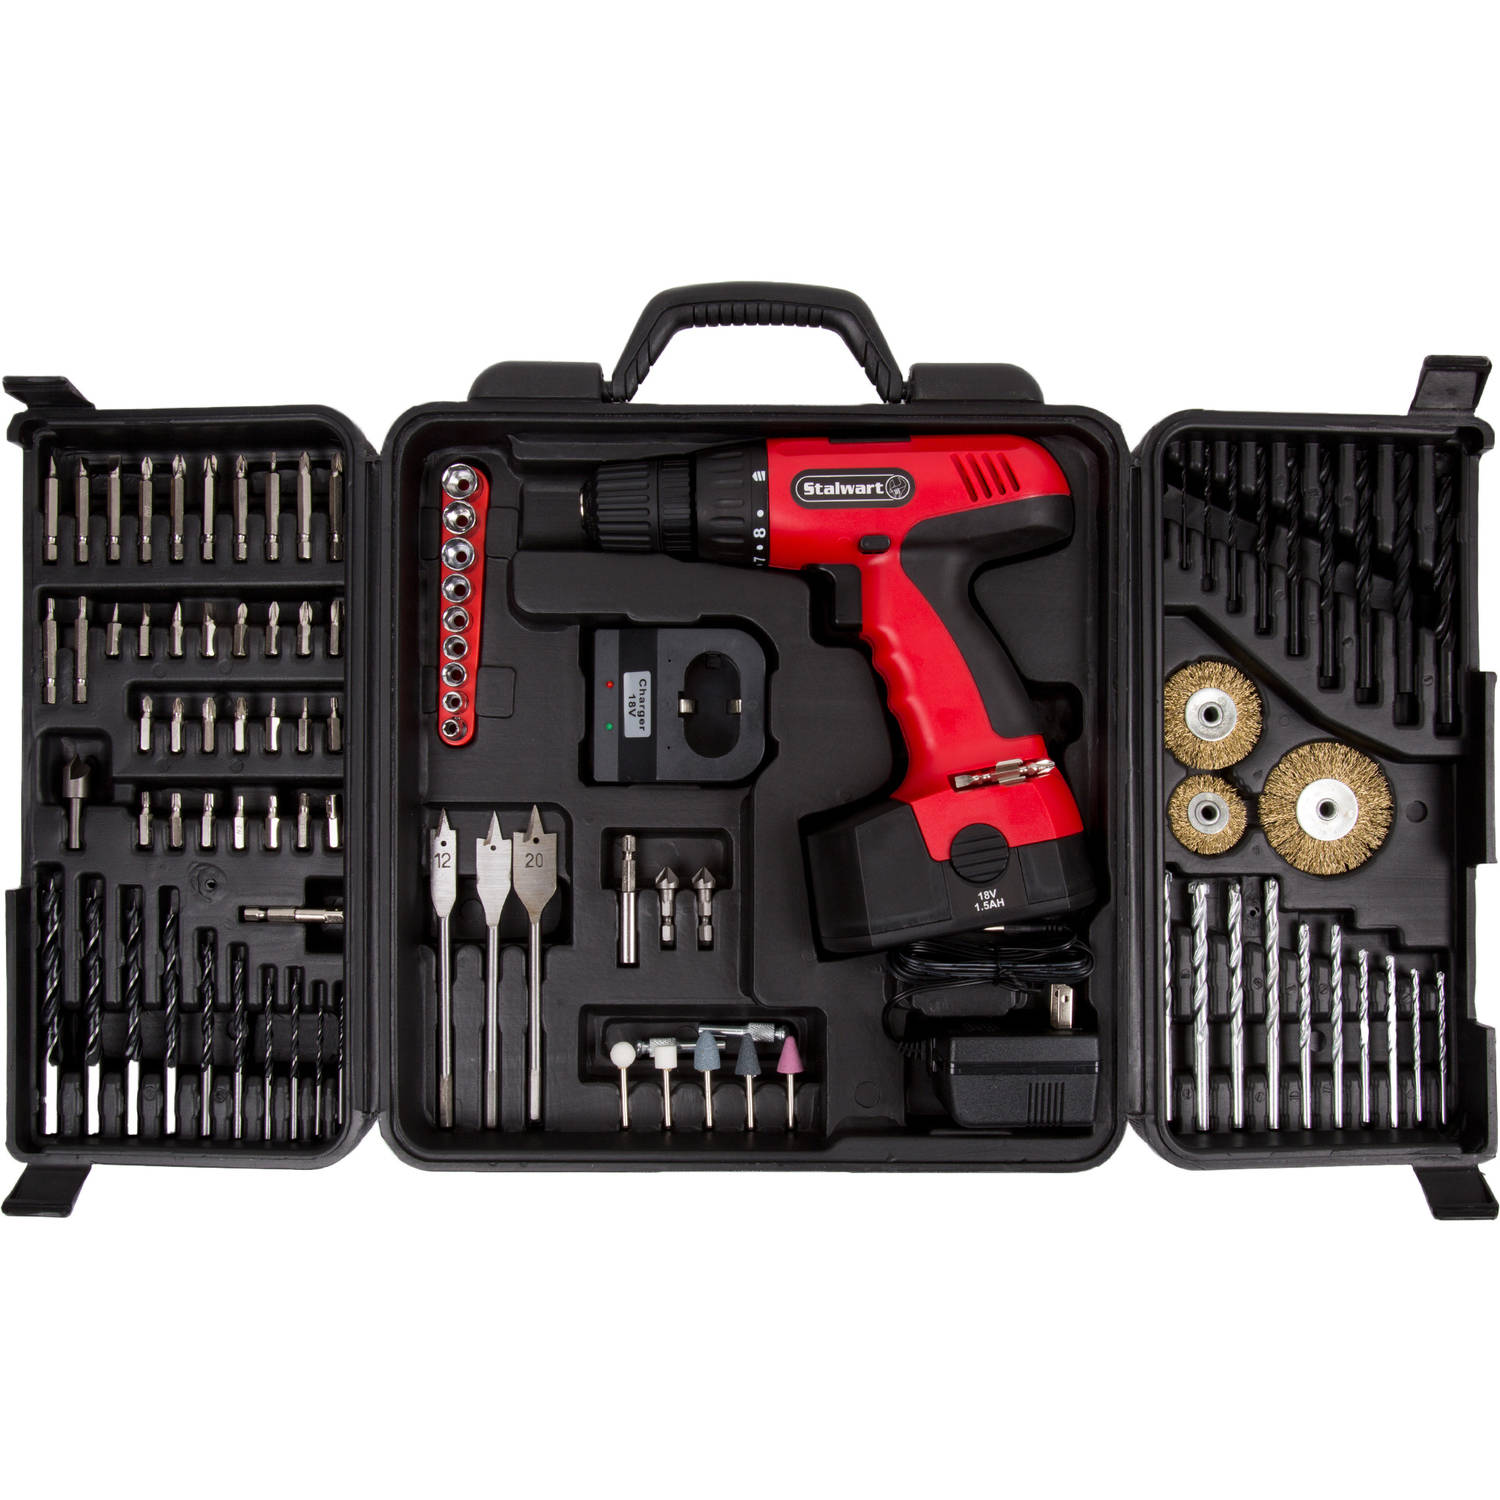 18V Cordless Drill Set - 89-Piece Tool Set with Drill Bits Sockets Driver Bits Rechargeable Battery and Tool Box by Stalwart - image 1 of 12